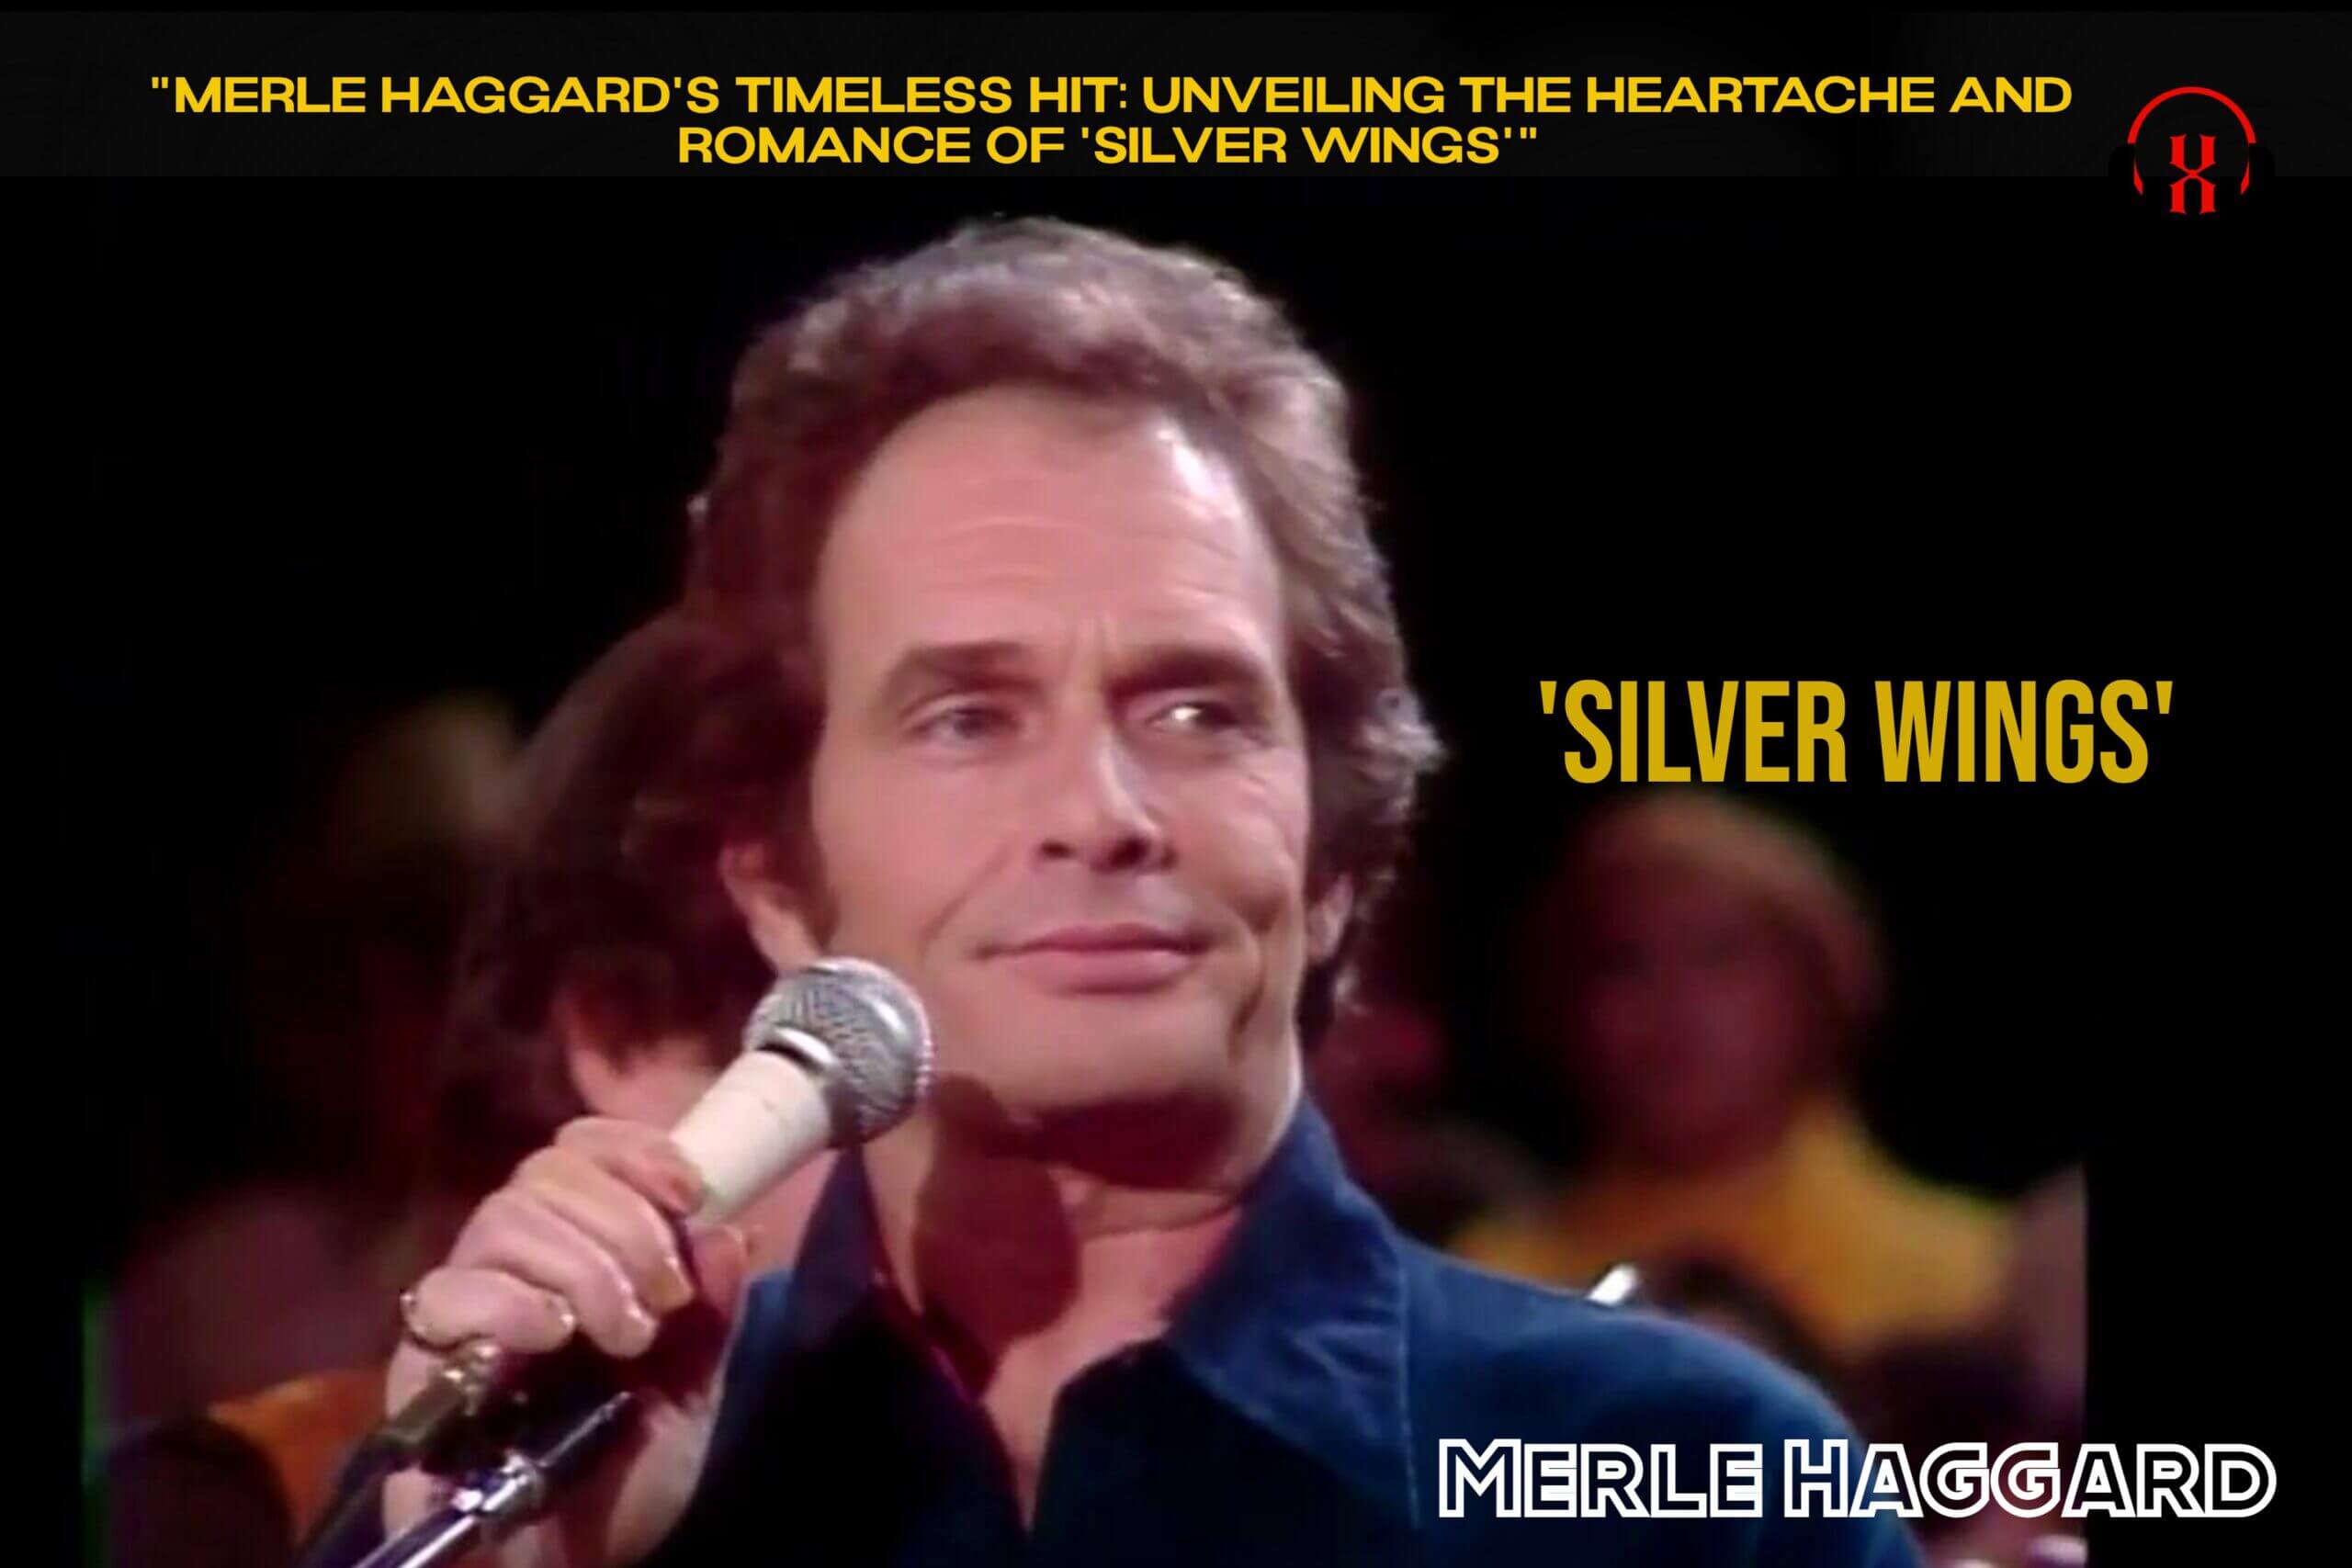 “Merle Haggard’s Timeless Hit: Unveiling the Heartache and Romance of ‘Silver Wings'”